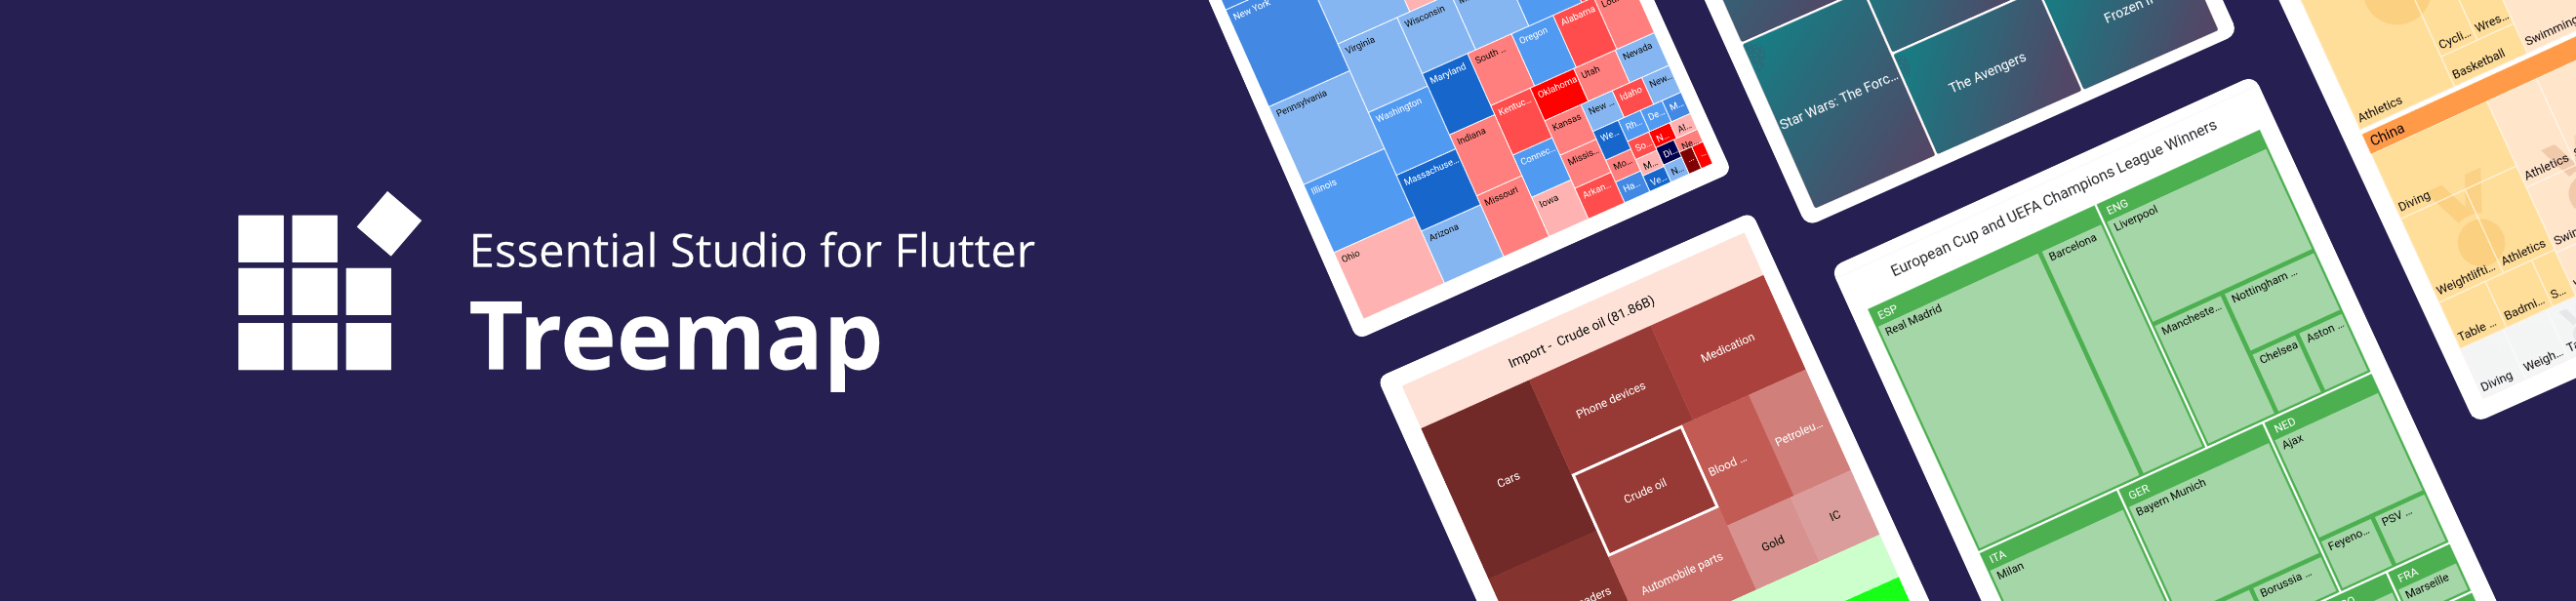 syncfusion_flutter_treemap_banner